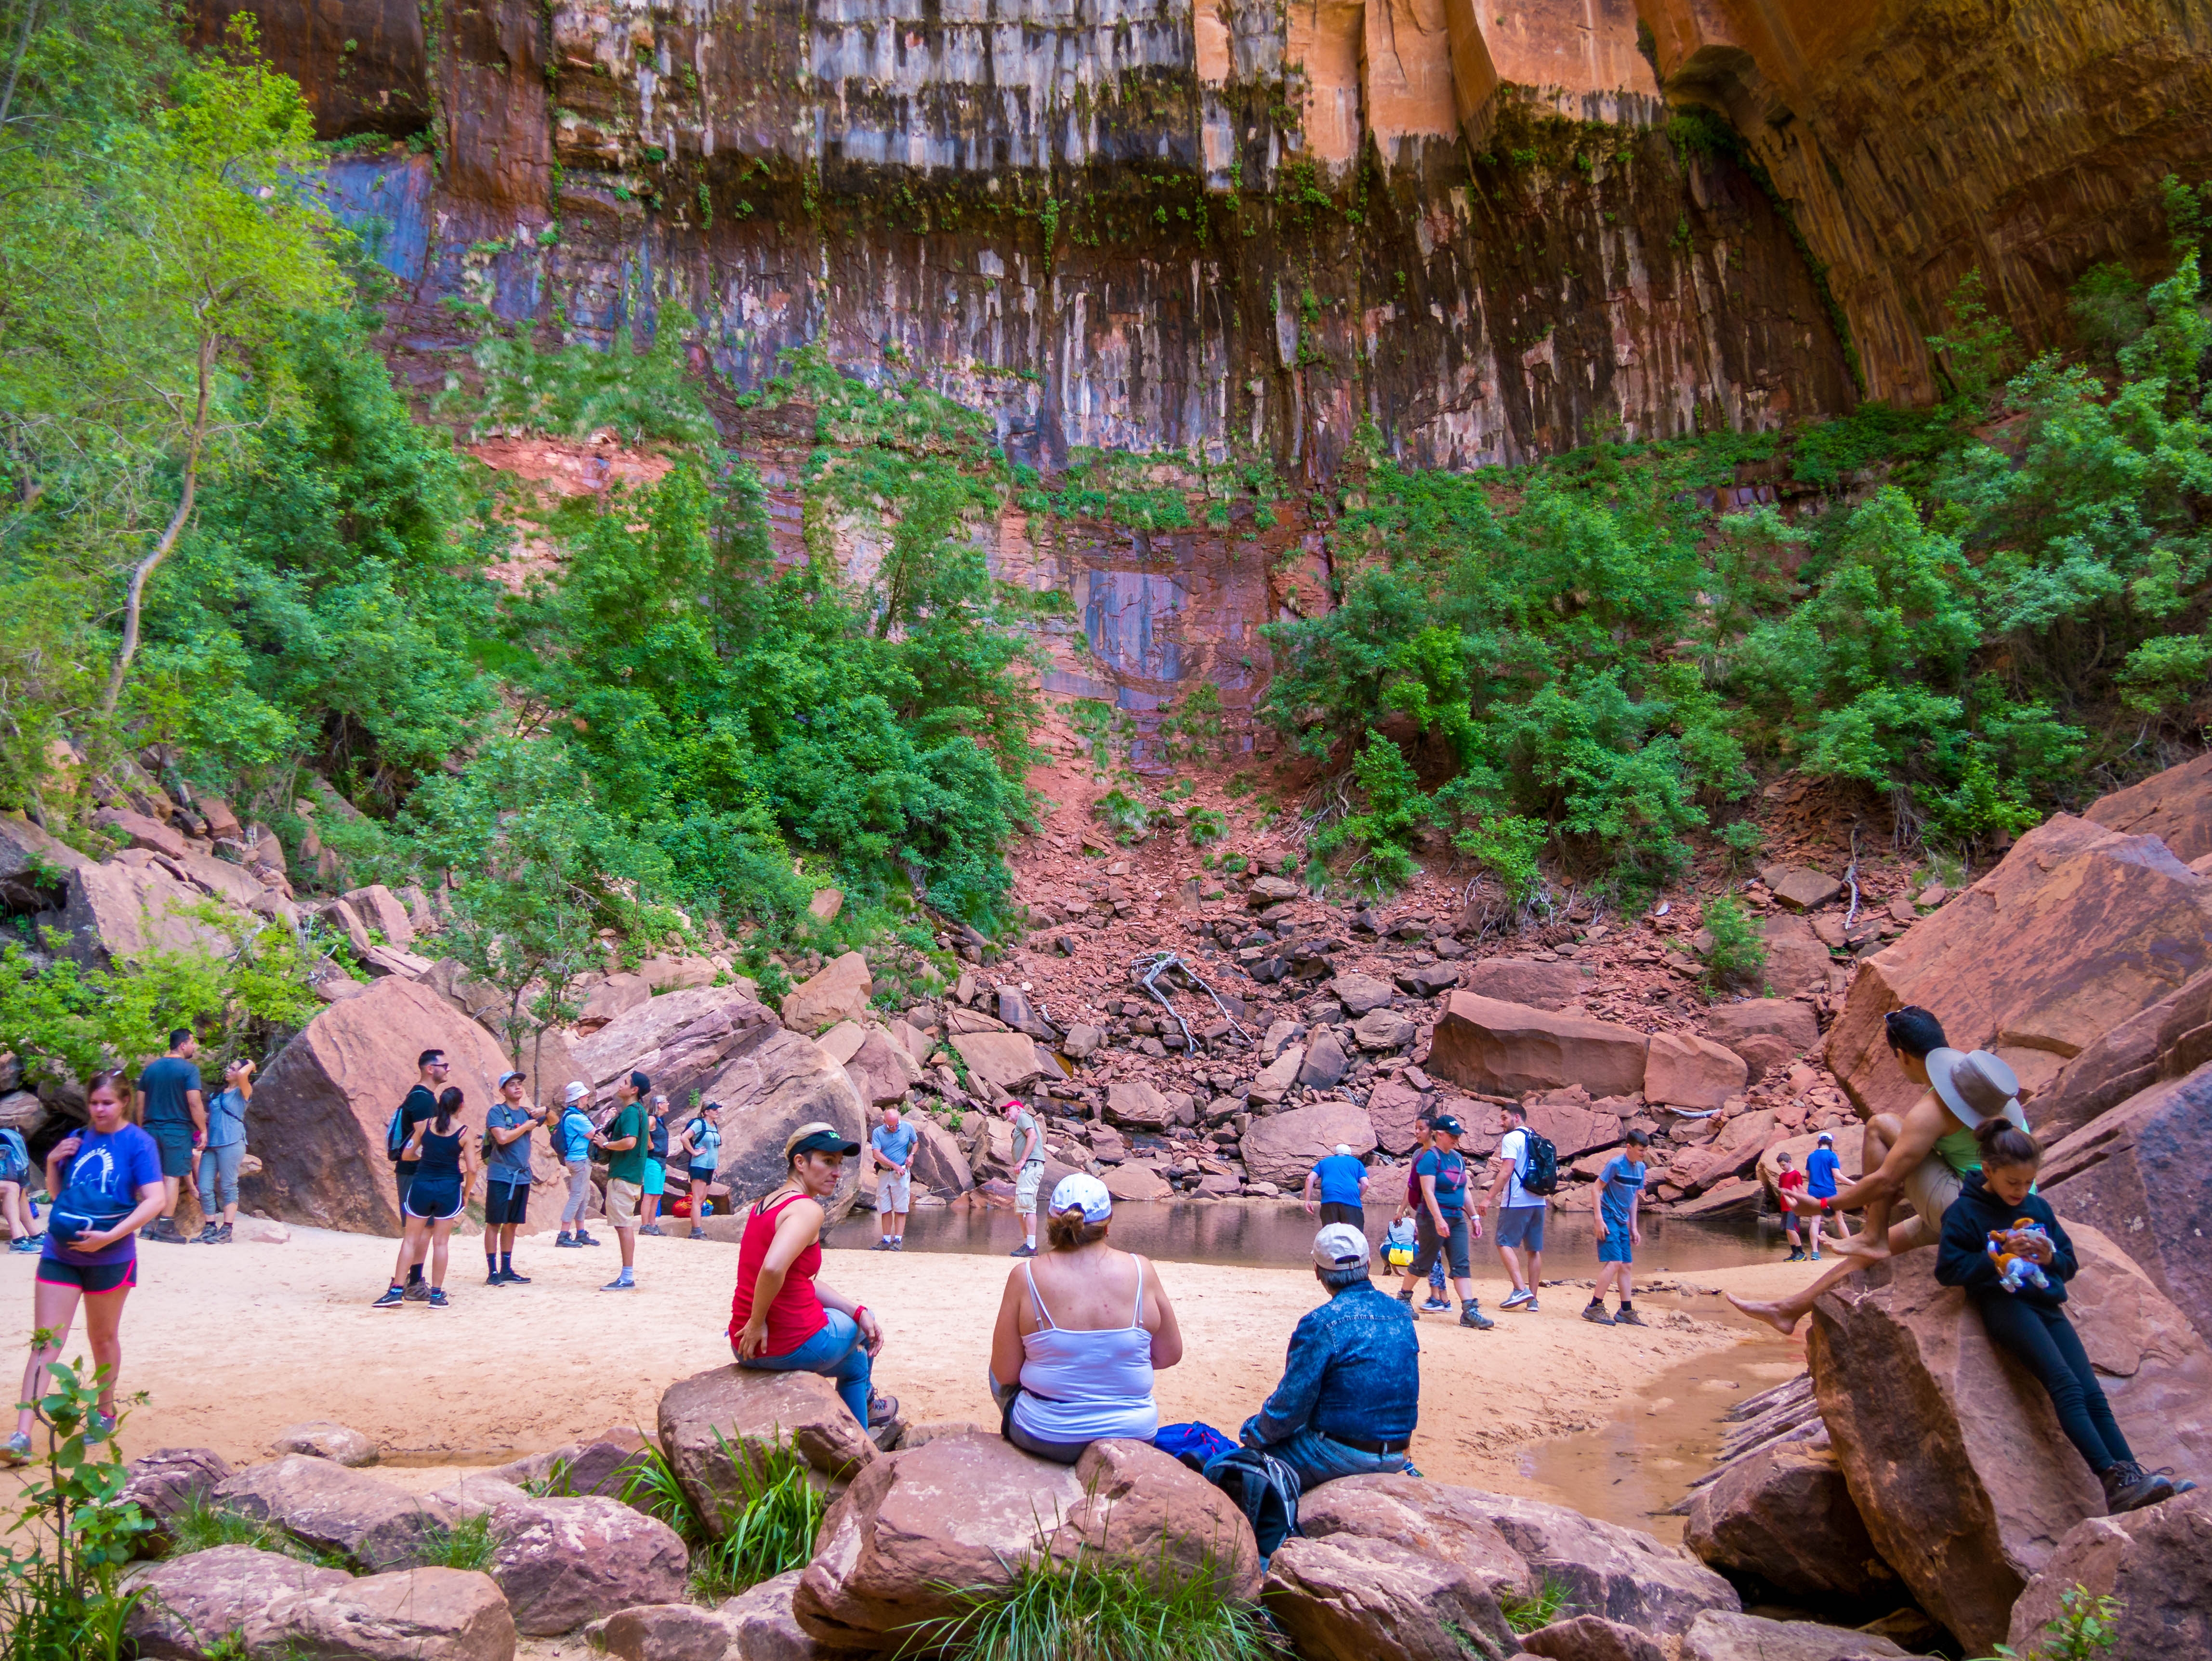 Hikers at the upper emerald pool